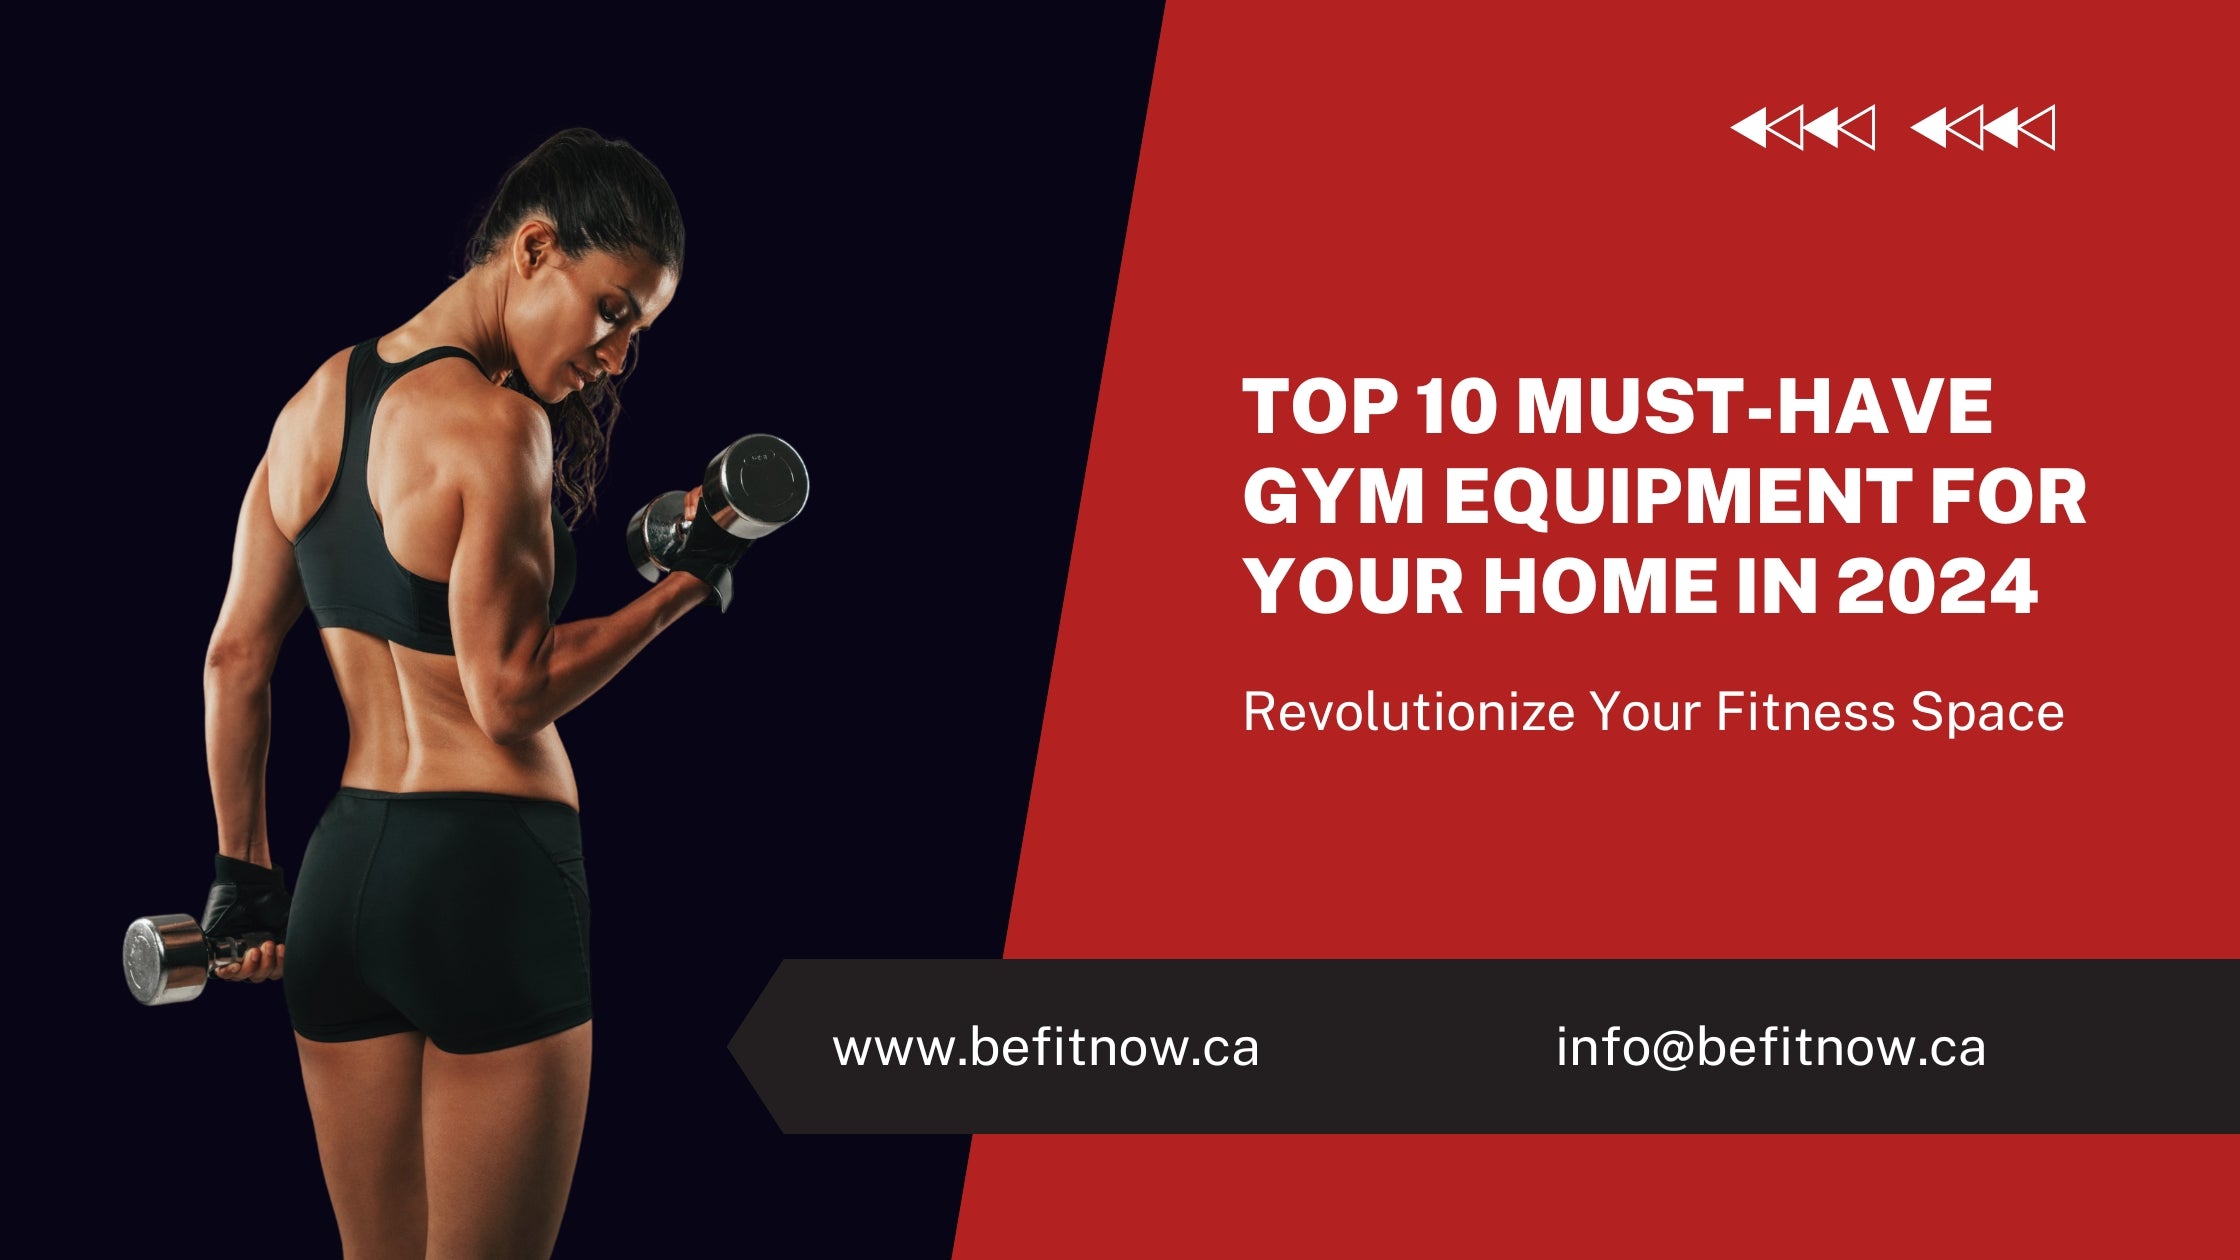 Top 10 Must-Have Gym Equipment for Your Home in 2024: Befitnow Canada